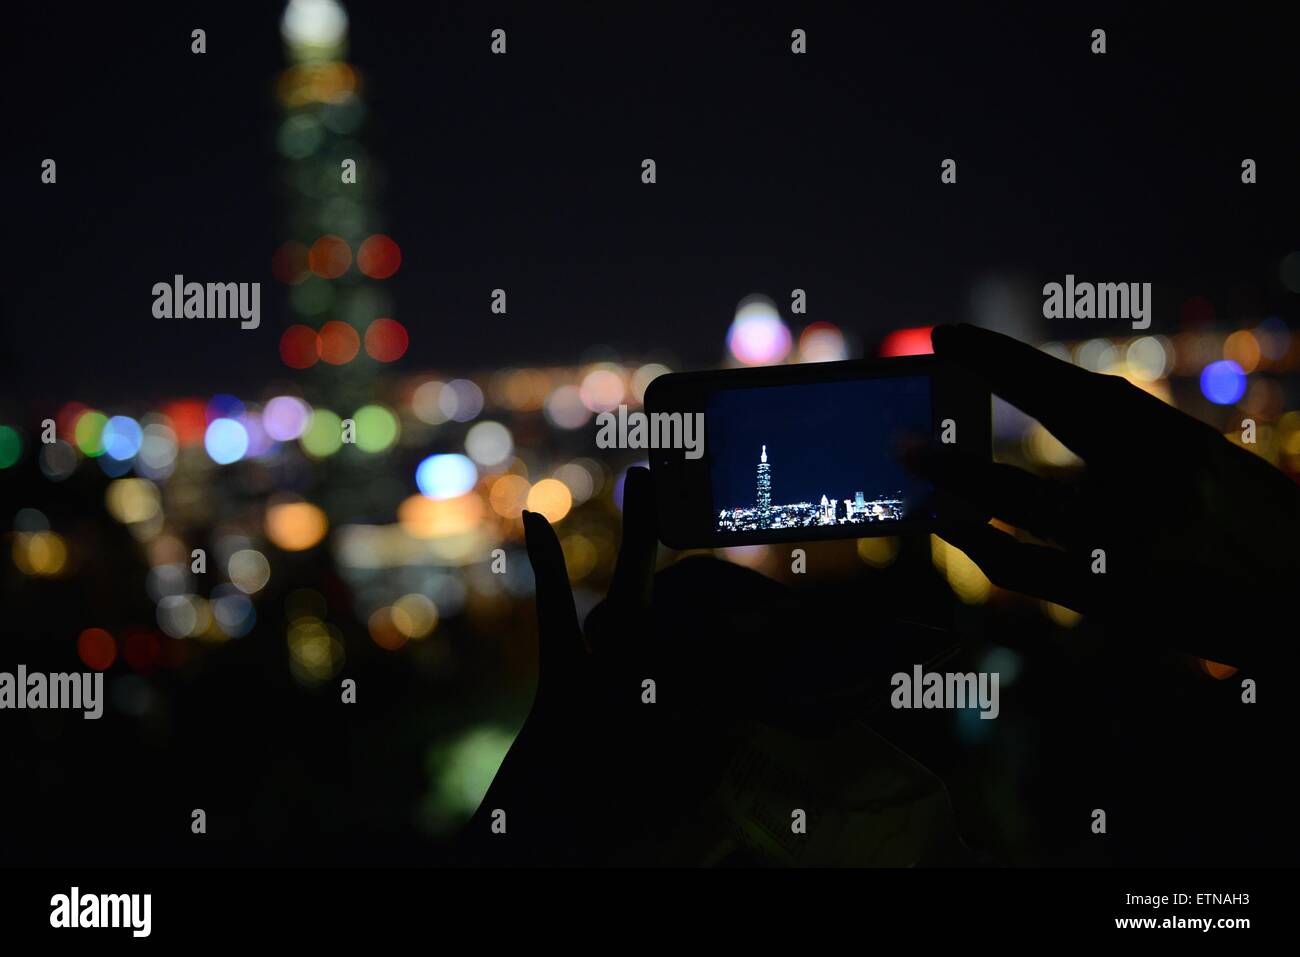 Silhouette of a person holding a mobile device taking a photo of Taipei, Taiwan Stock Photo